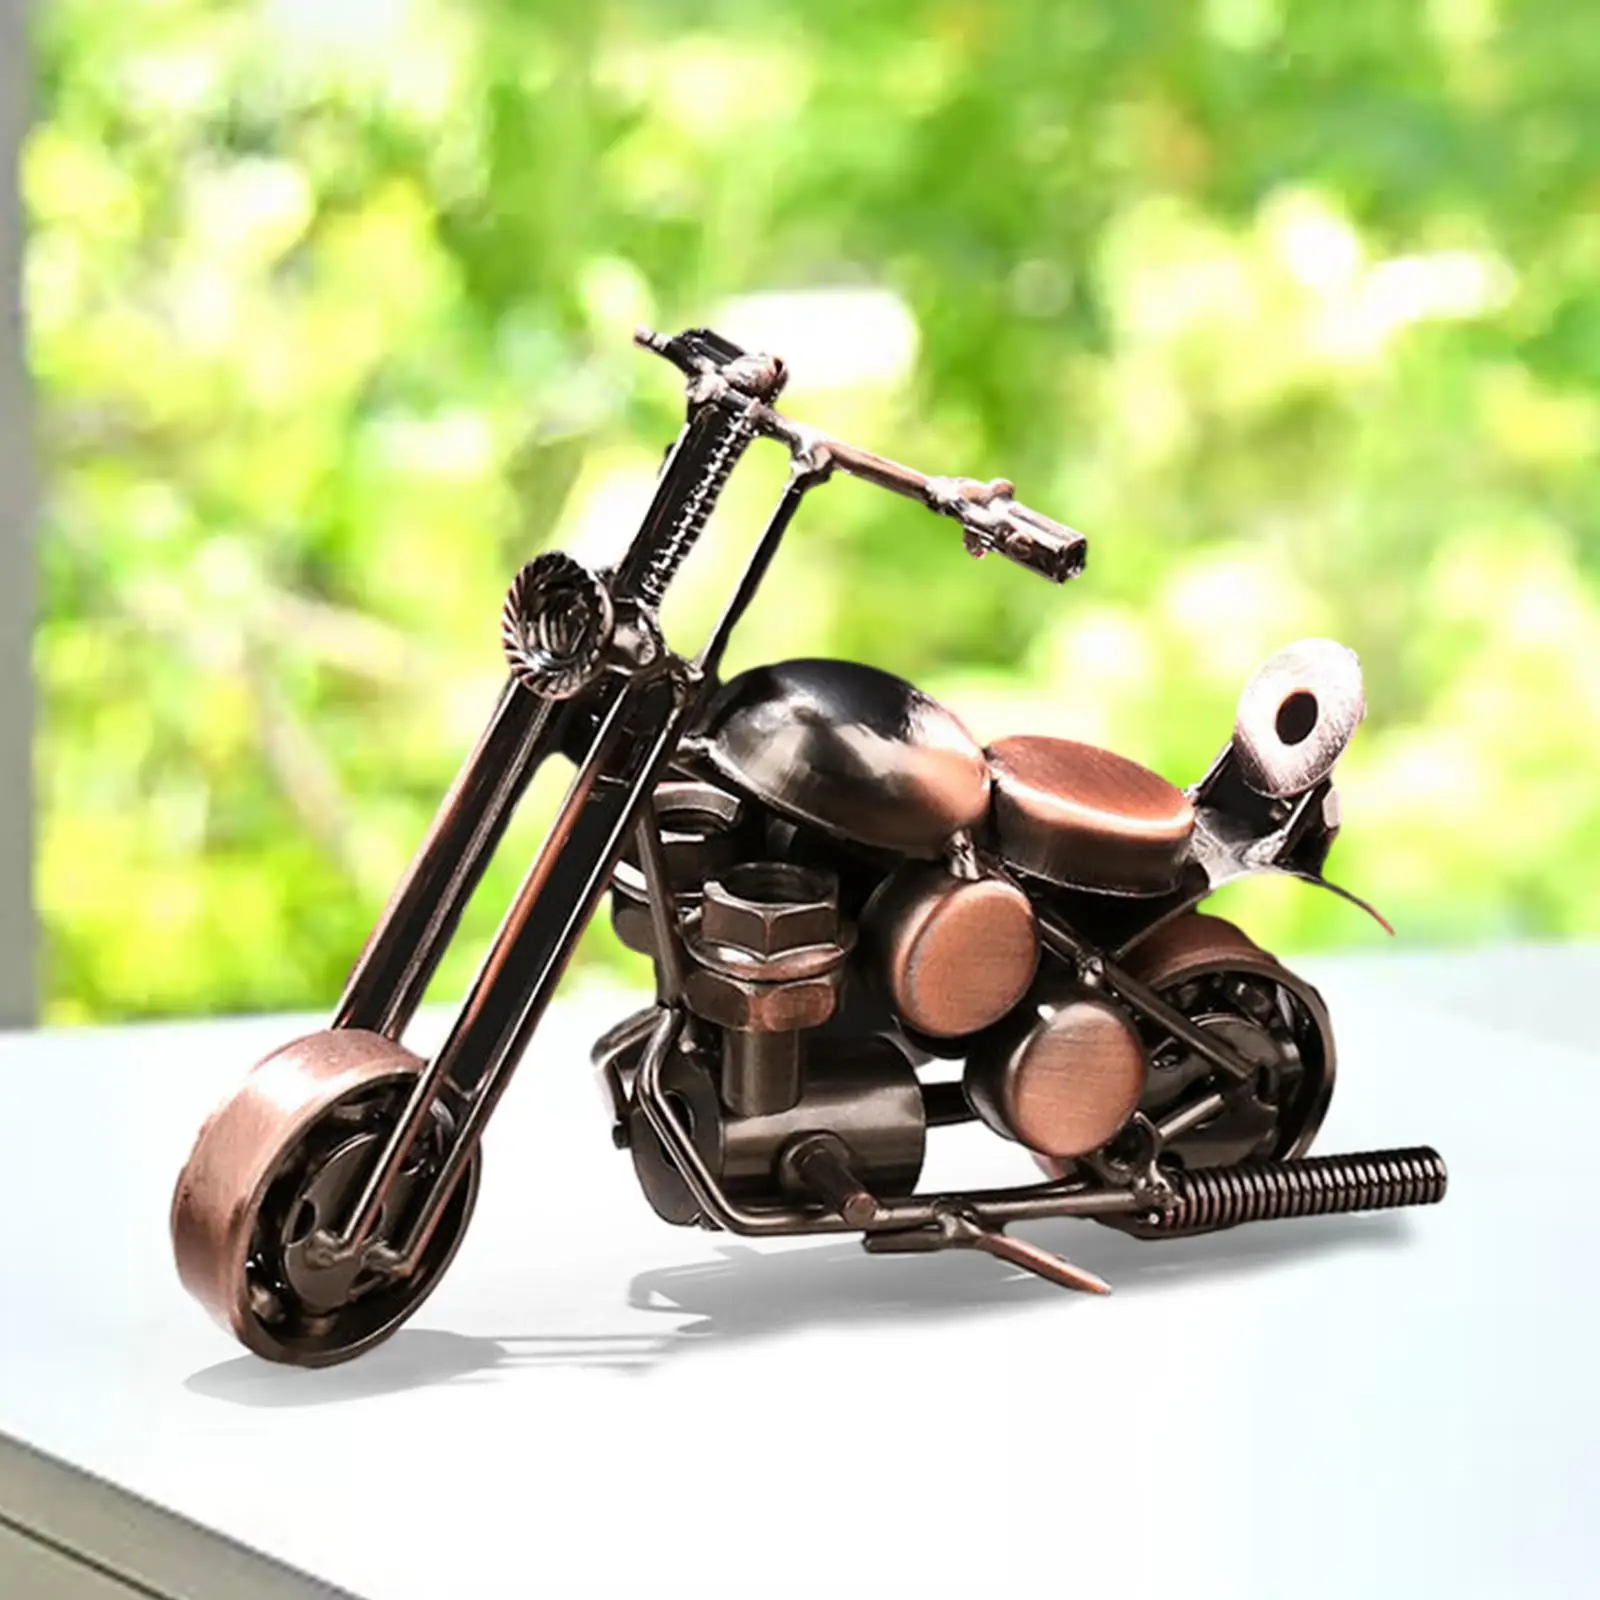 Motorcycle Model Motorcycle Sculpture Creative Photo Props Iron Novelty Ornament for Home Desk Office Bookshelf Boys